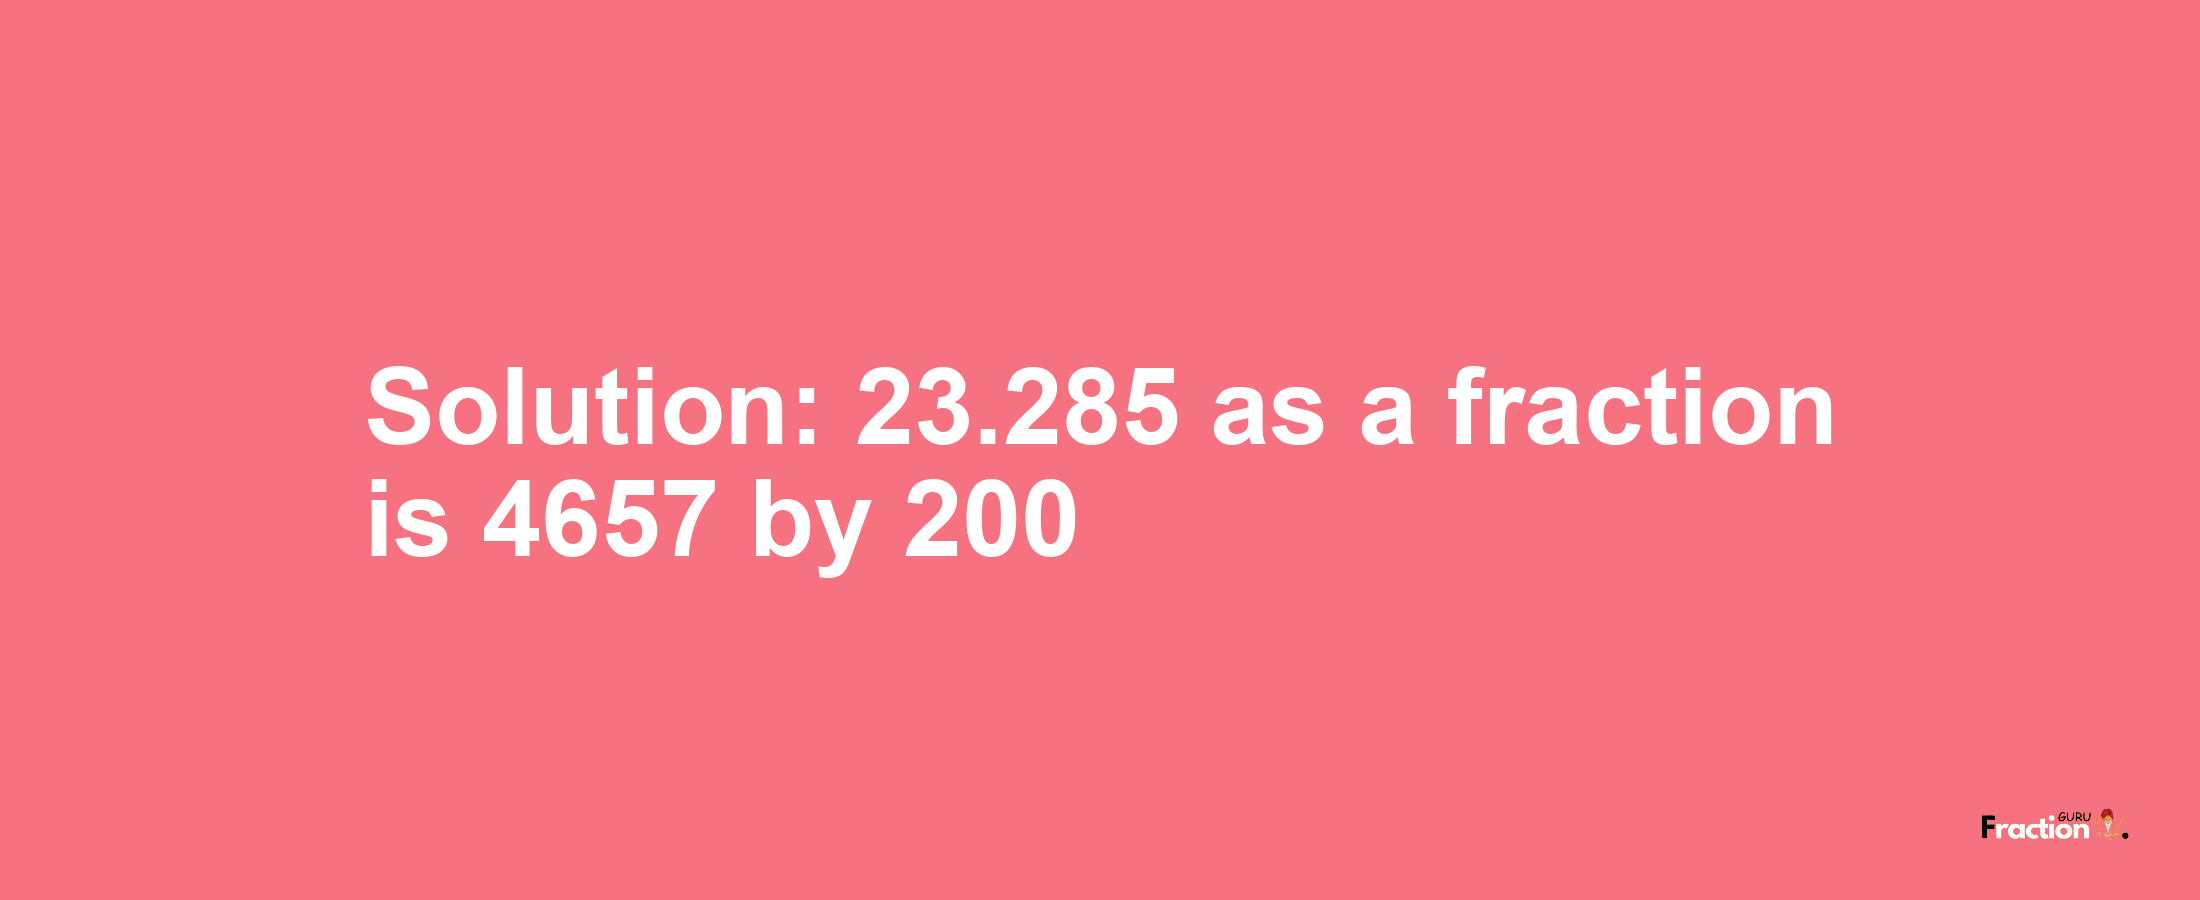 Solution:23.285 as a fraction is 4657/200